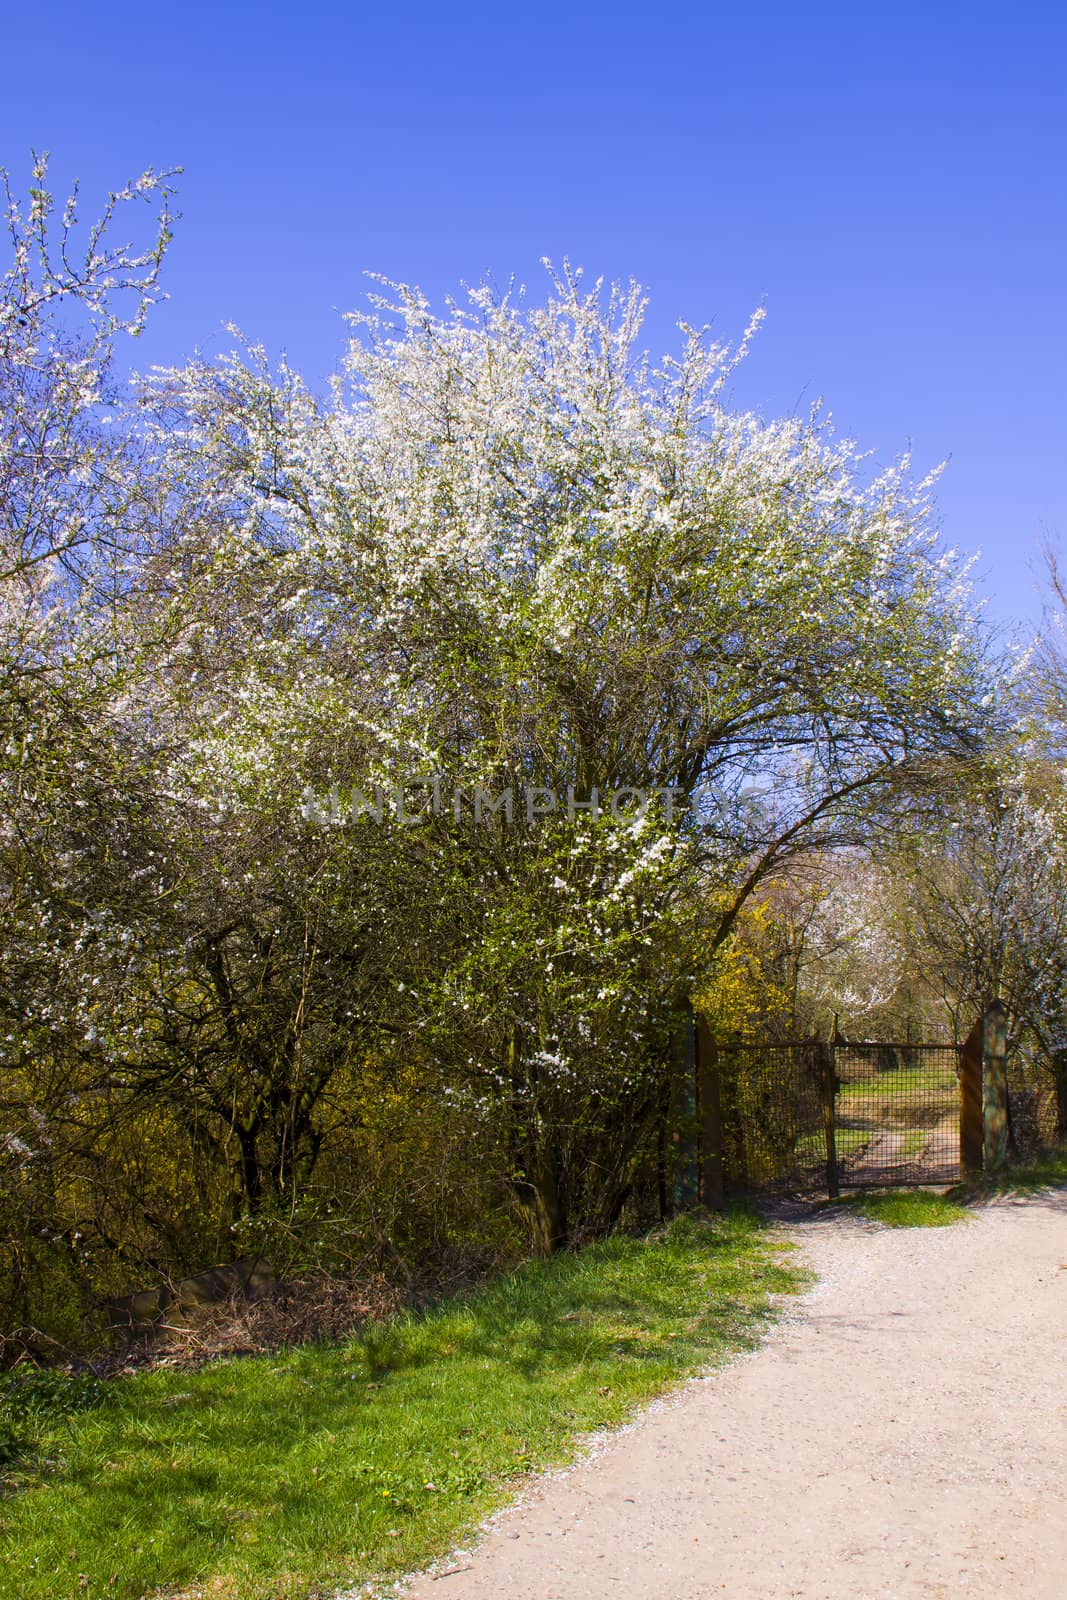 Path in spring with a gate on the side